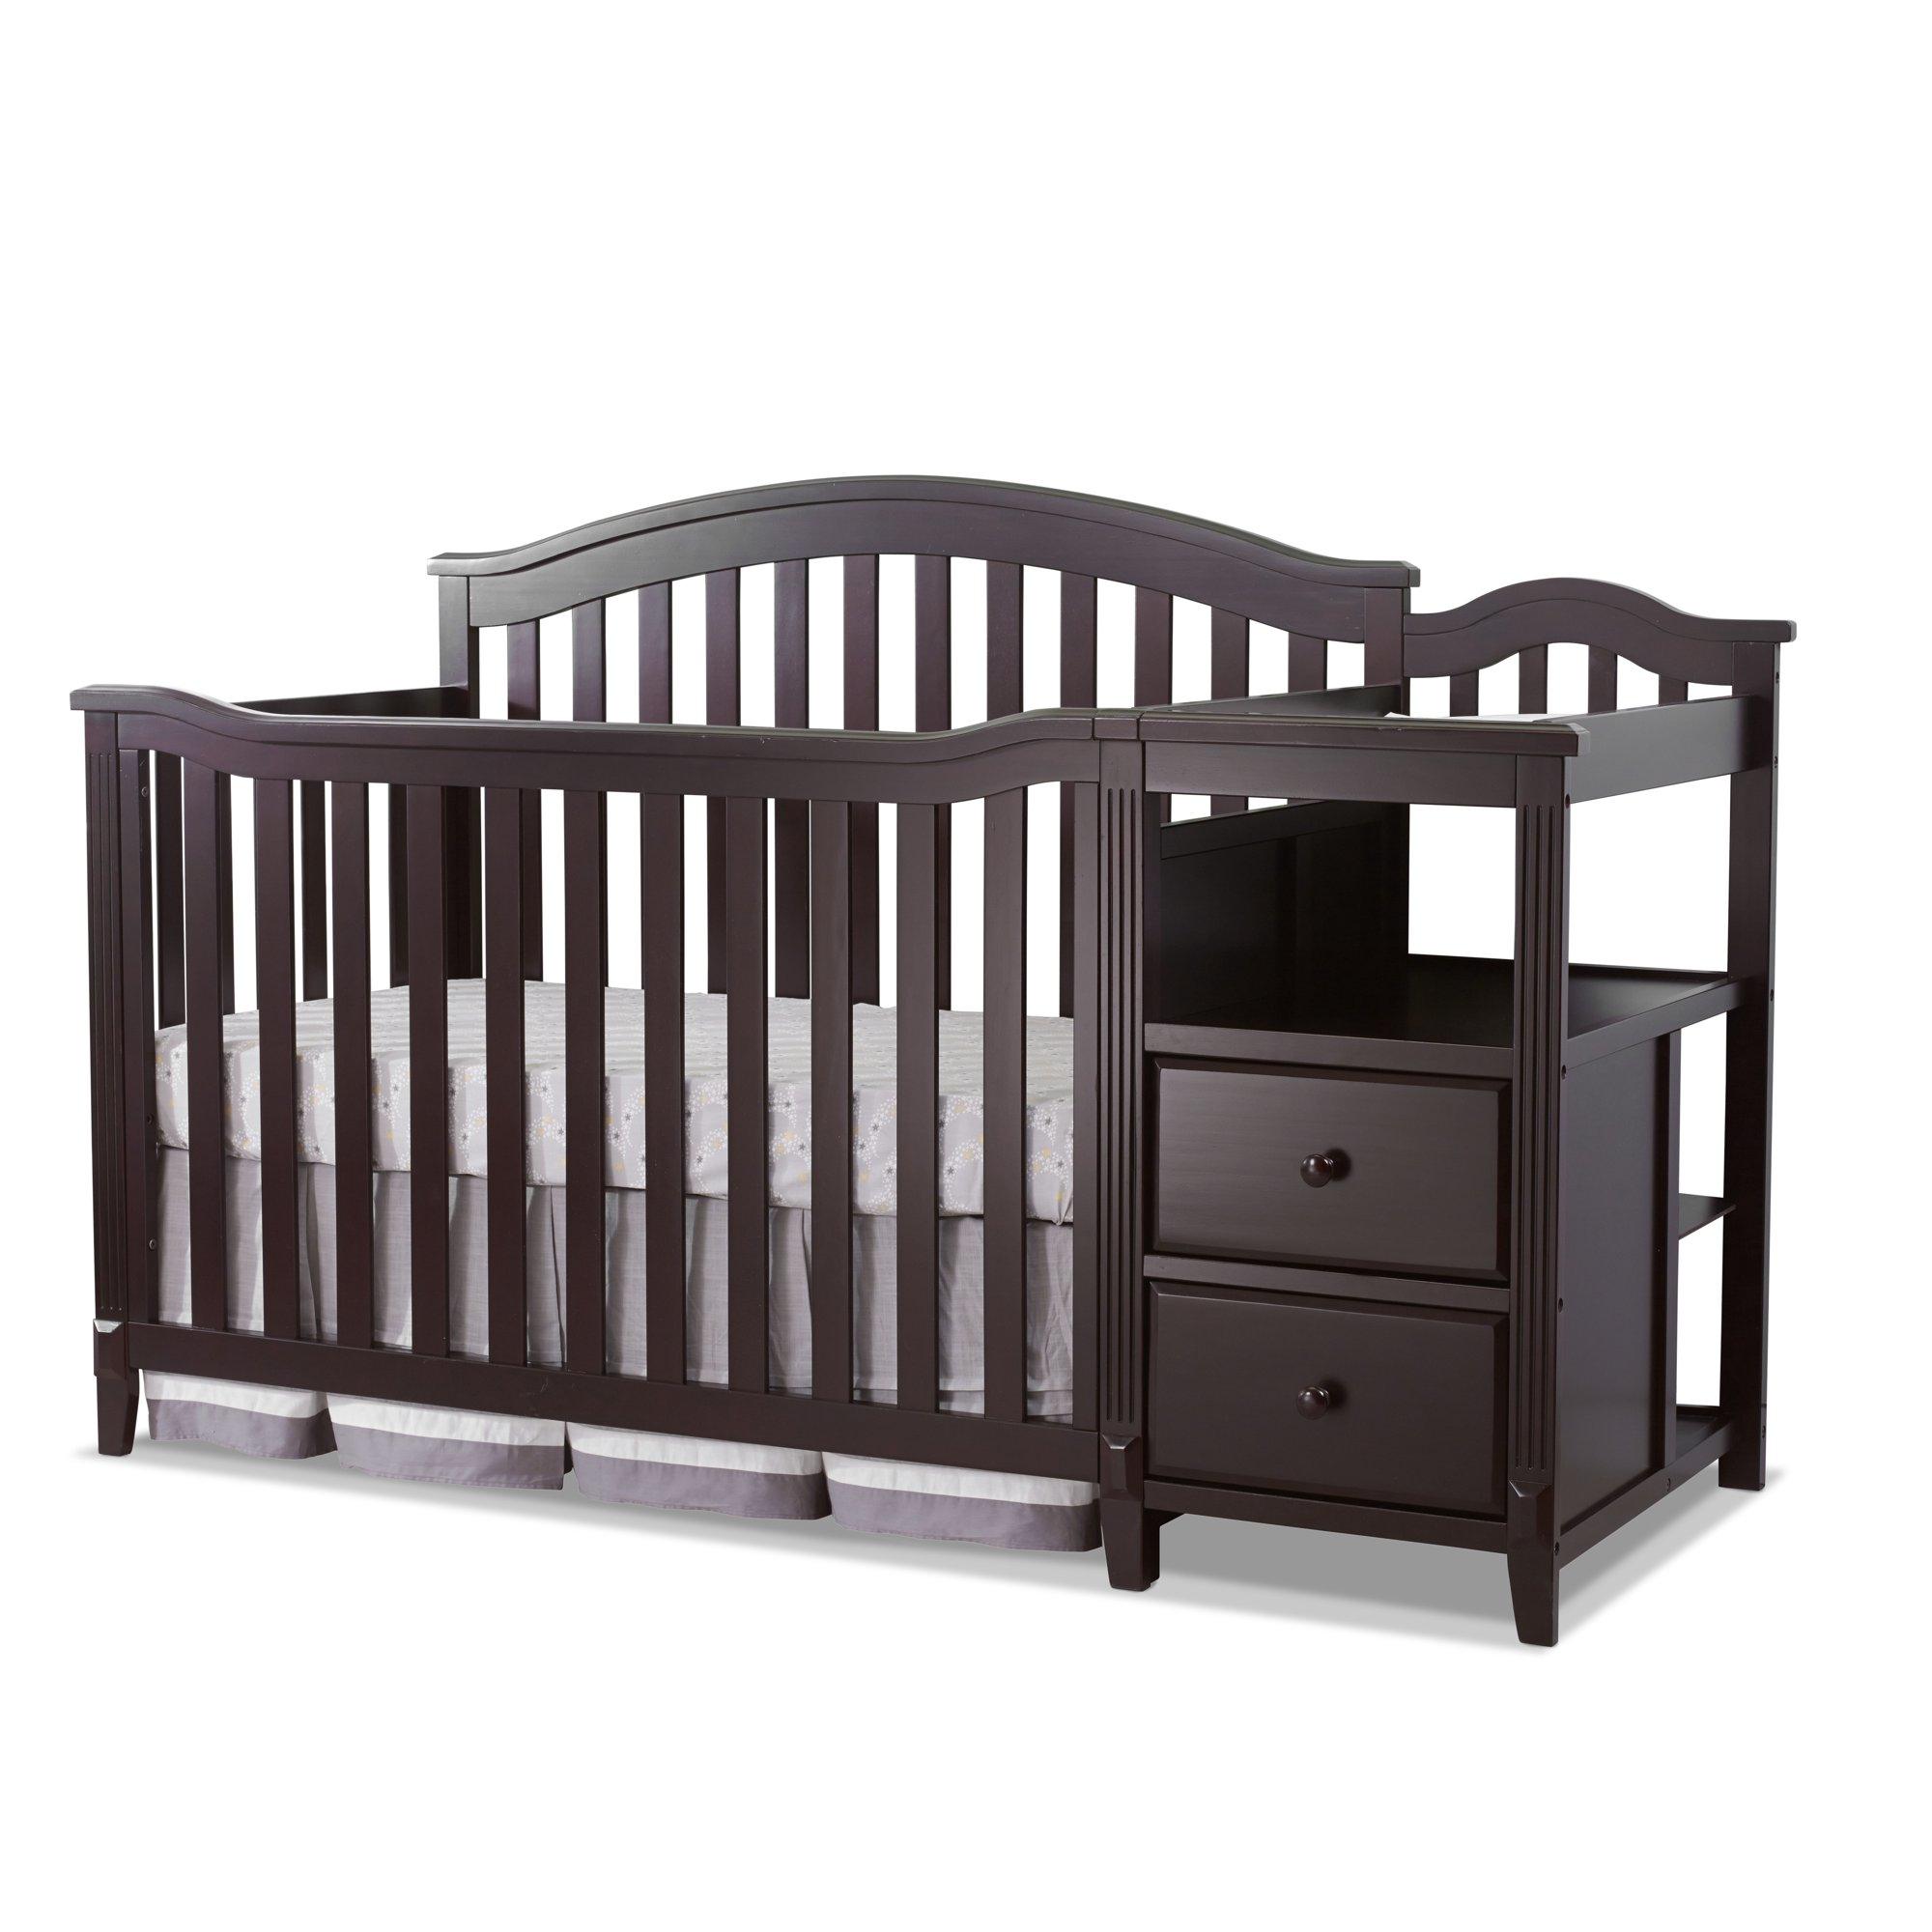 Multi-Functional Modern Baby Cot Bed Baby Crib With Drawers